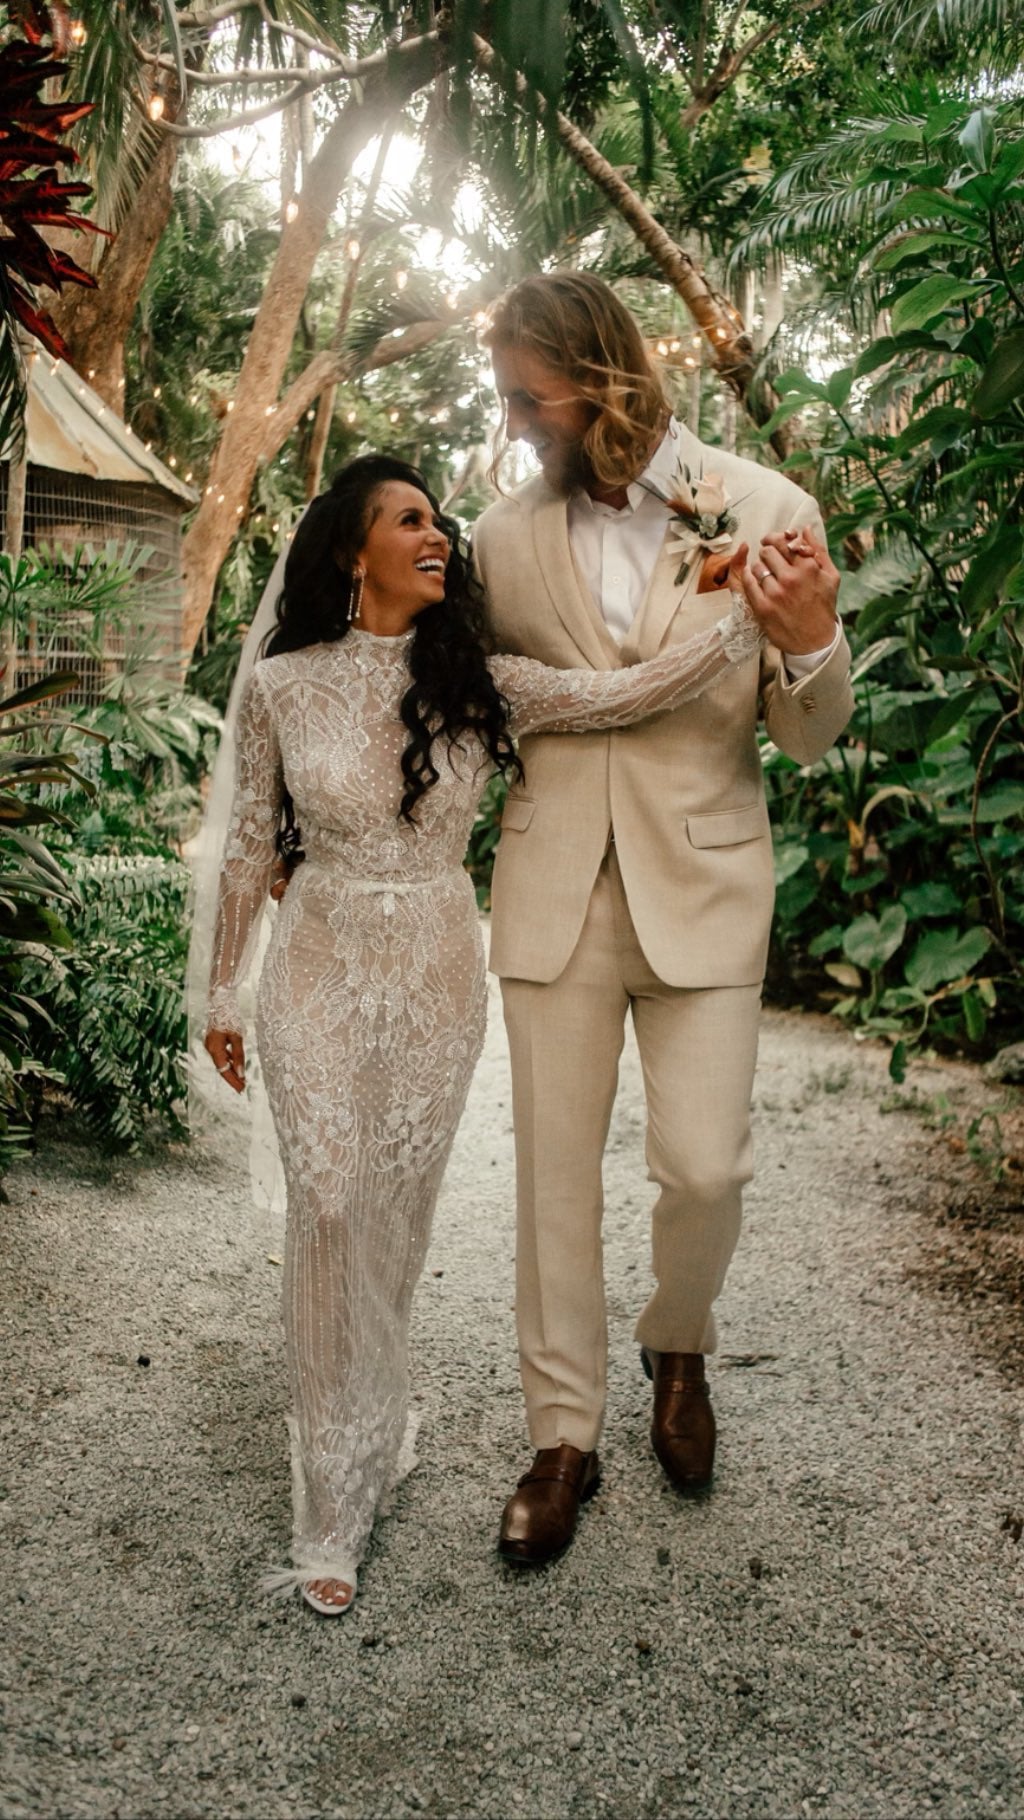 Vanessa Morgan Spends Time with Michael Kopech After Welcoming Son Together